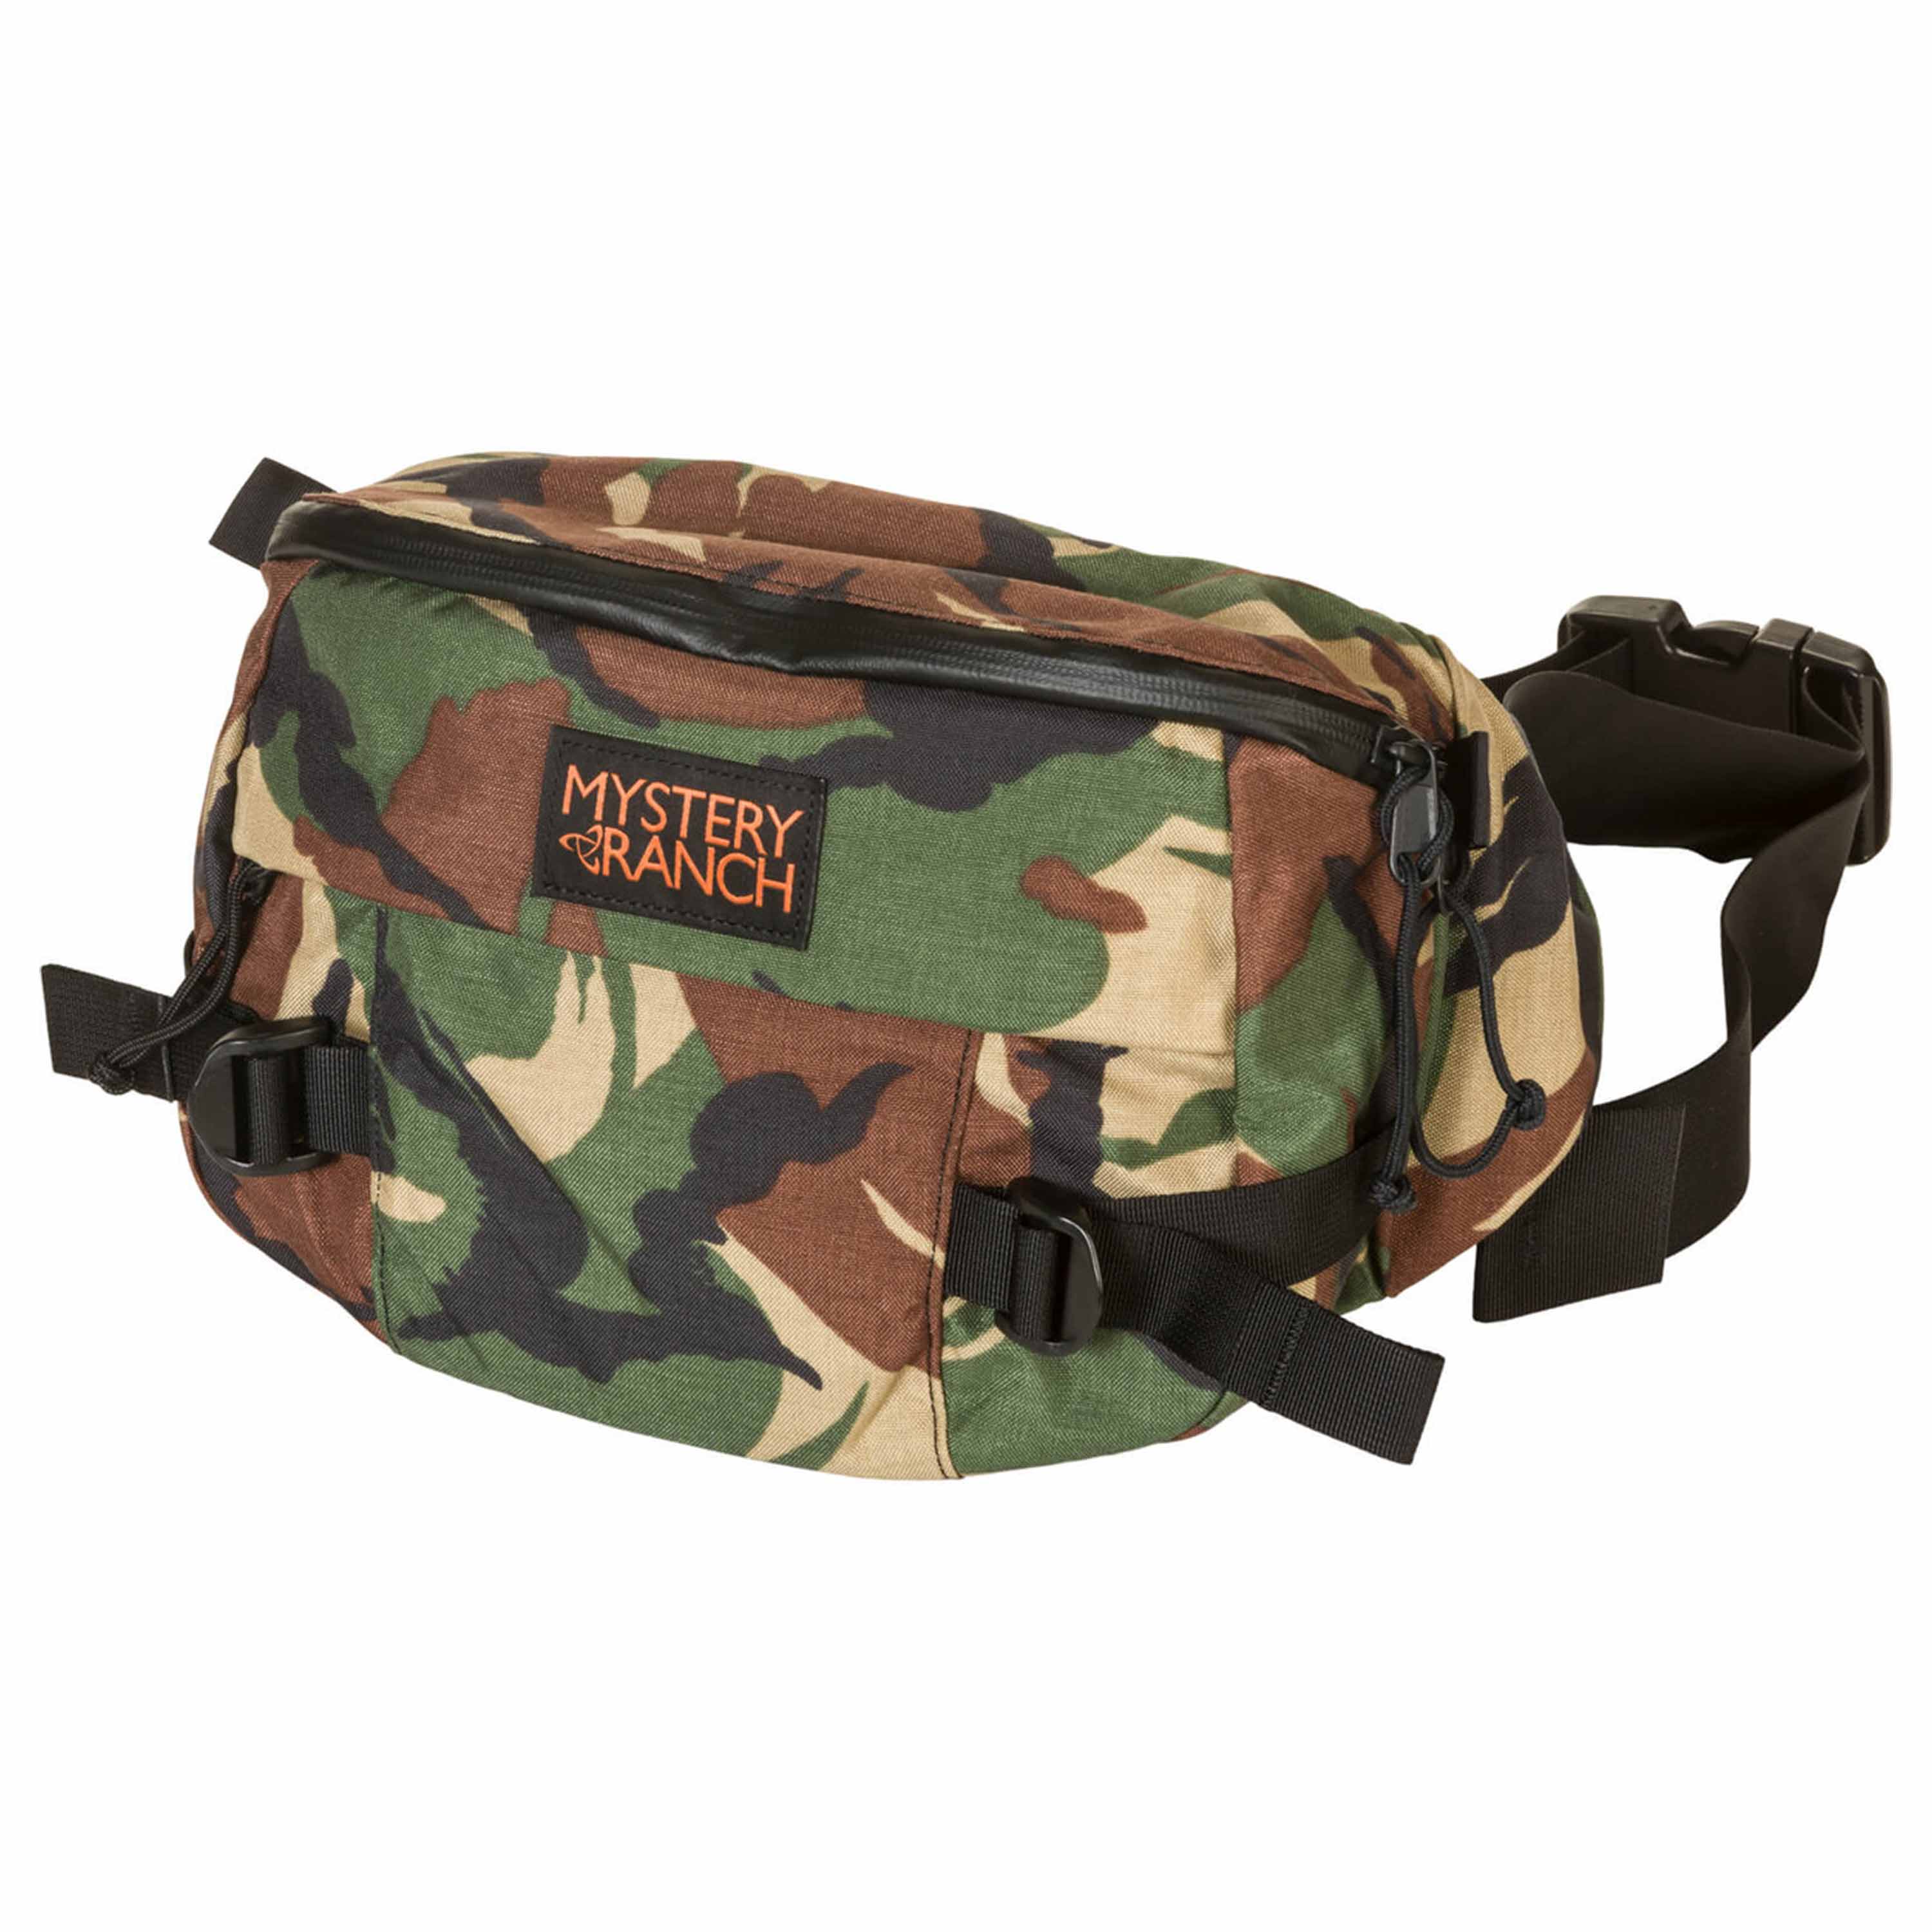 Purchase the Mystery Ranch Waist Pack Hip Monkey DPM camo by ASM